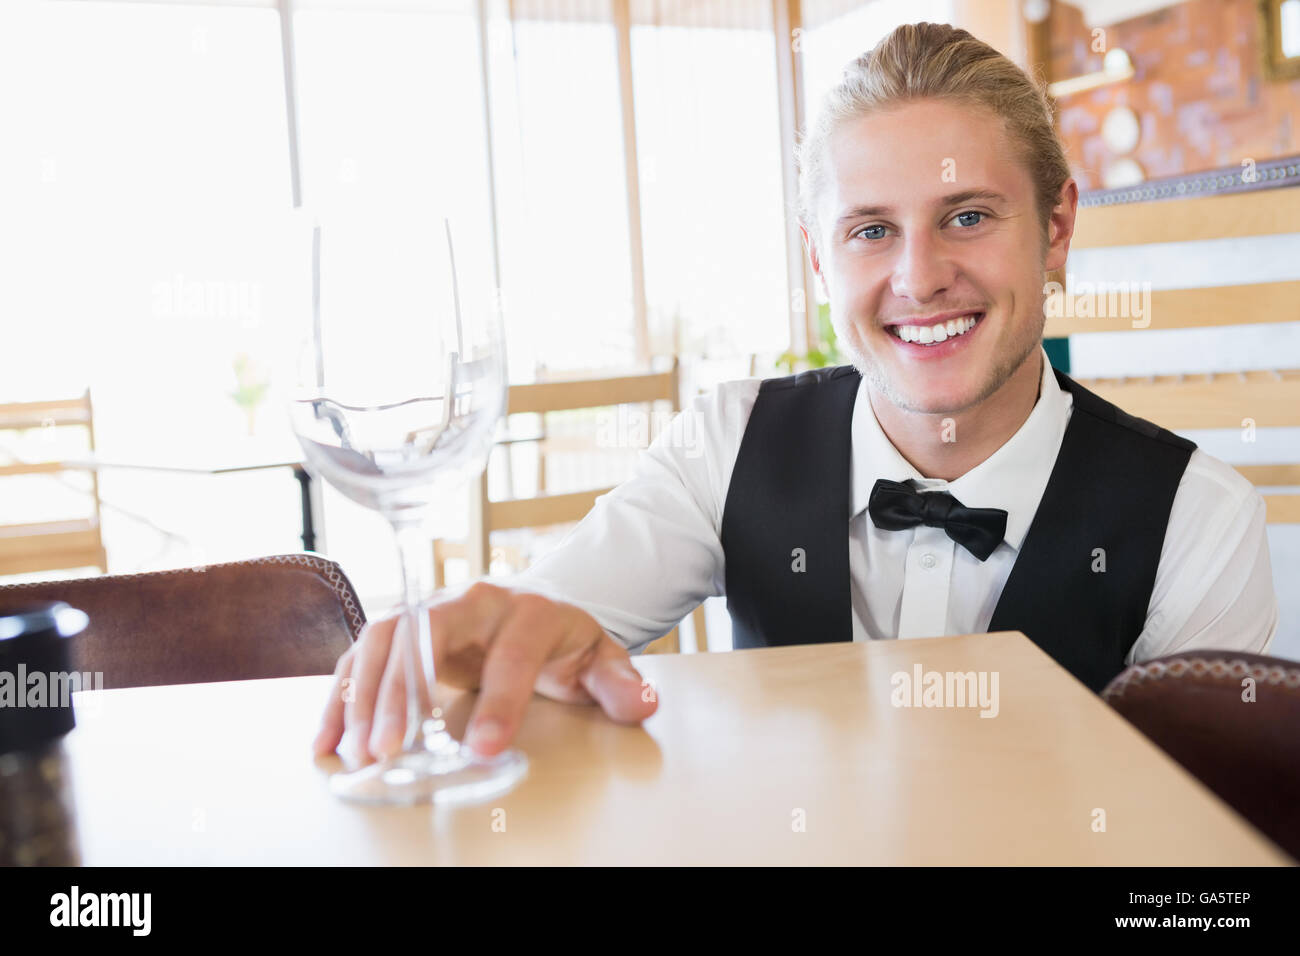 Waiter sitting at table with empty glass Stock Photo